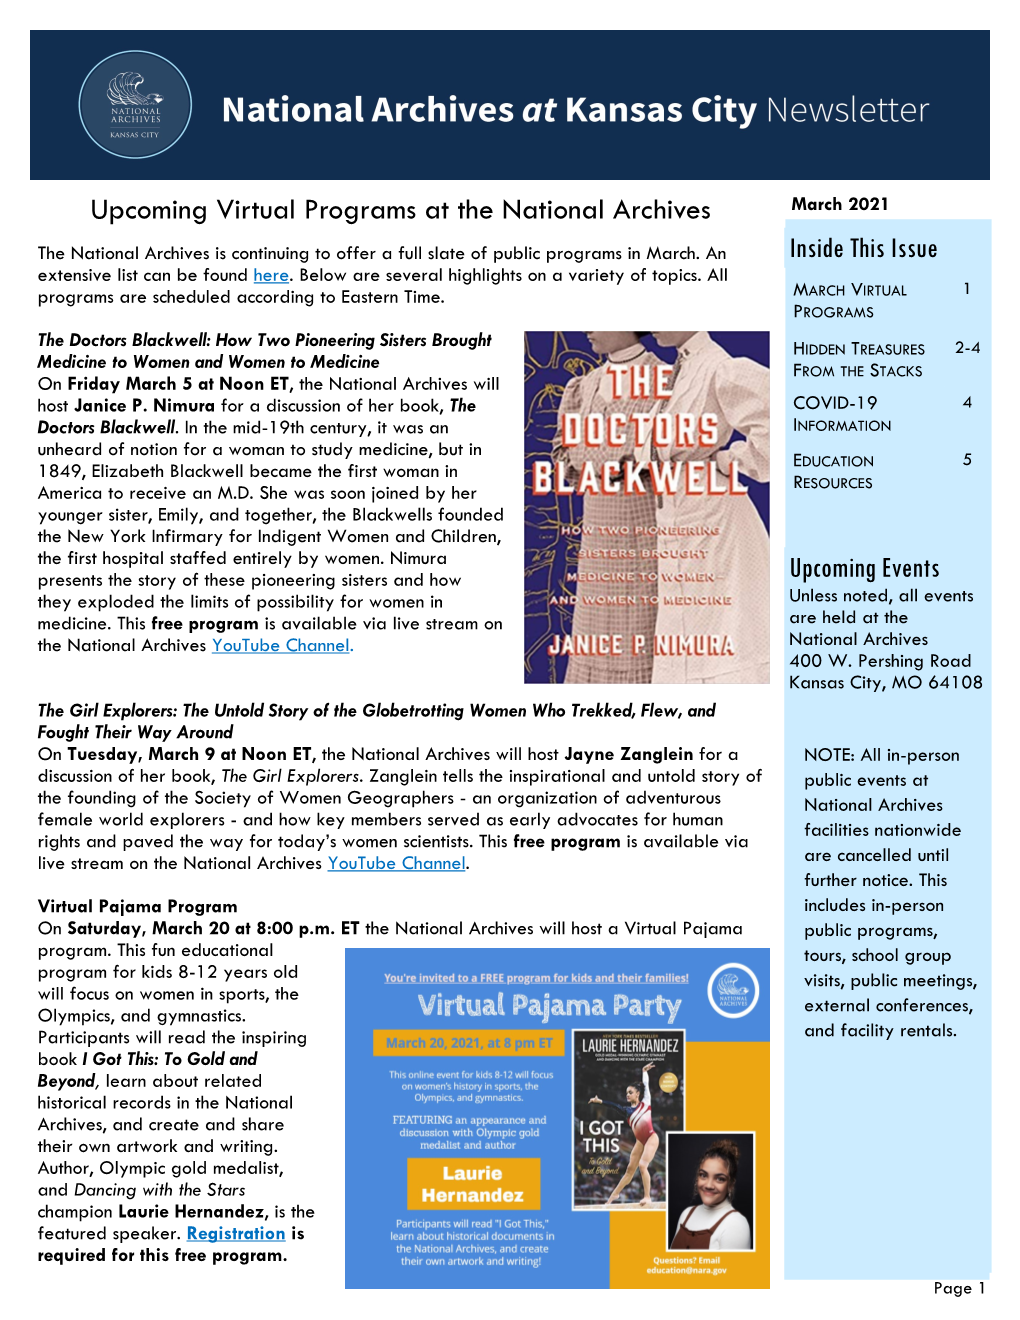 March 2021 the National Archives Is Continuing to Offer a Full Slate of Public Programs in March